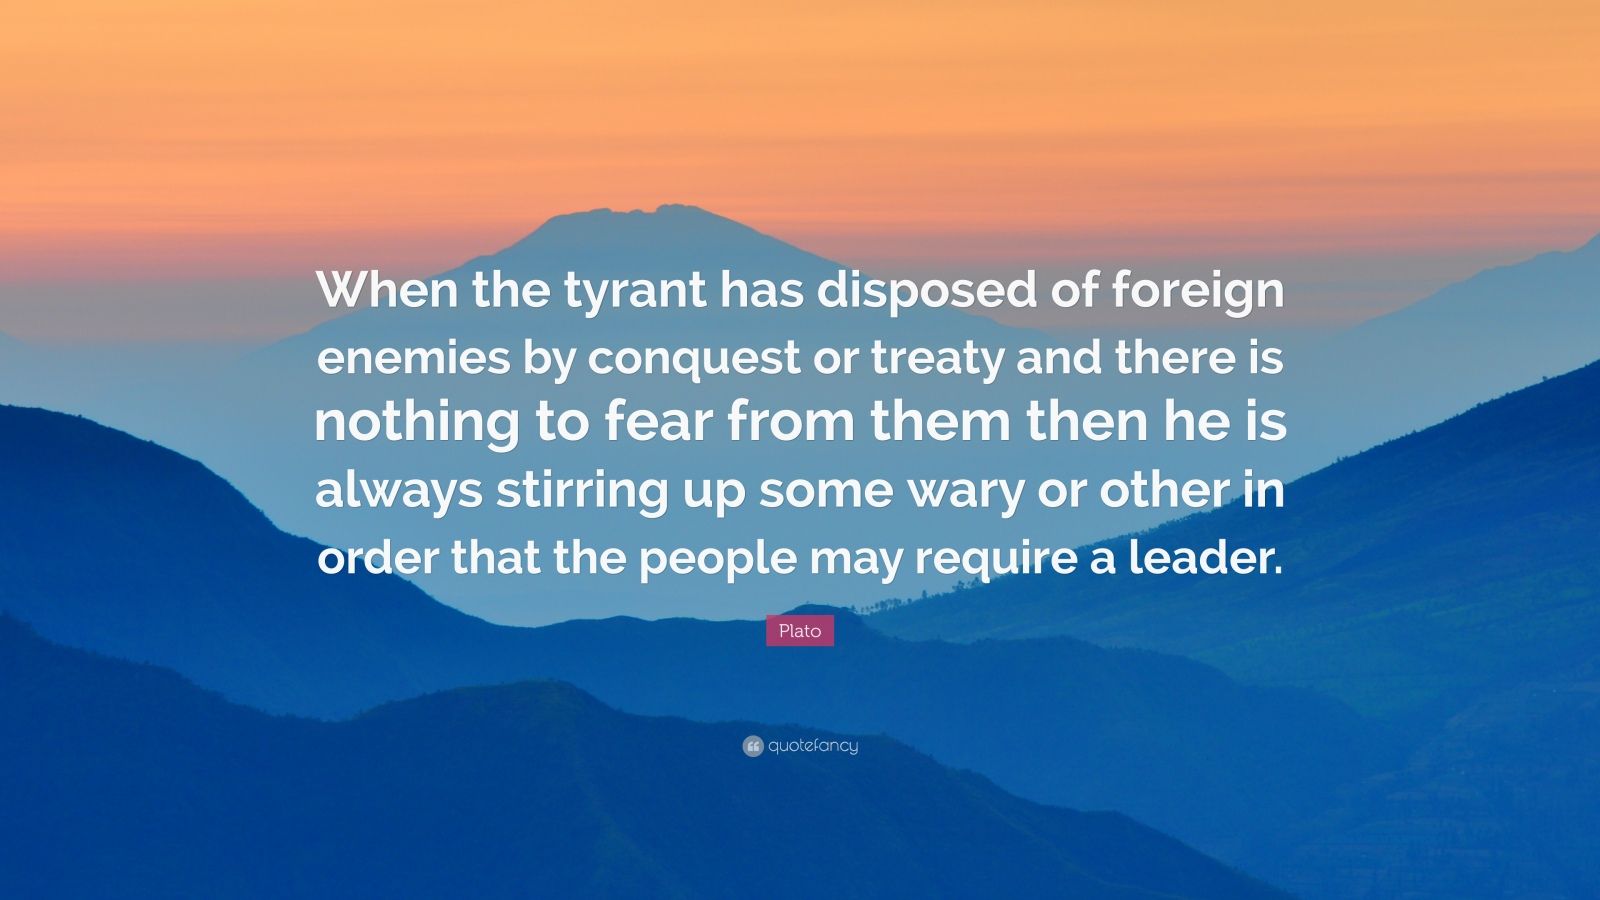 plato quote: "when the tyrant has disposed of foreign enemies by